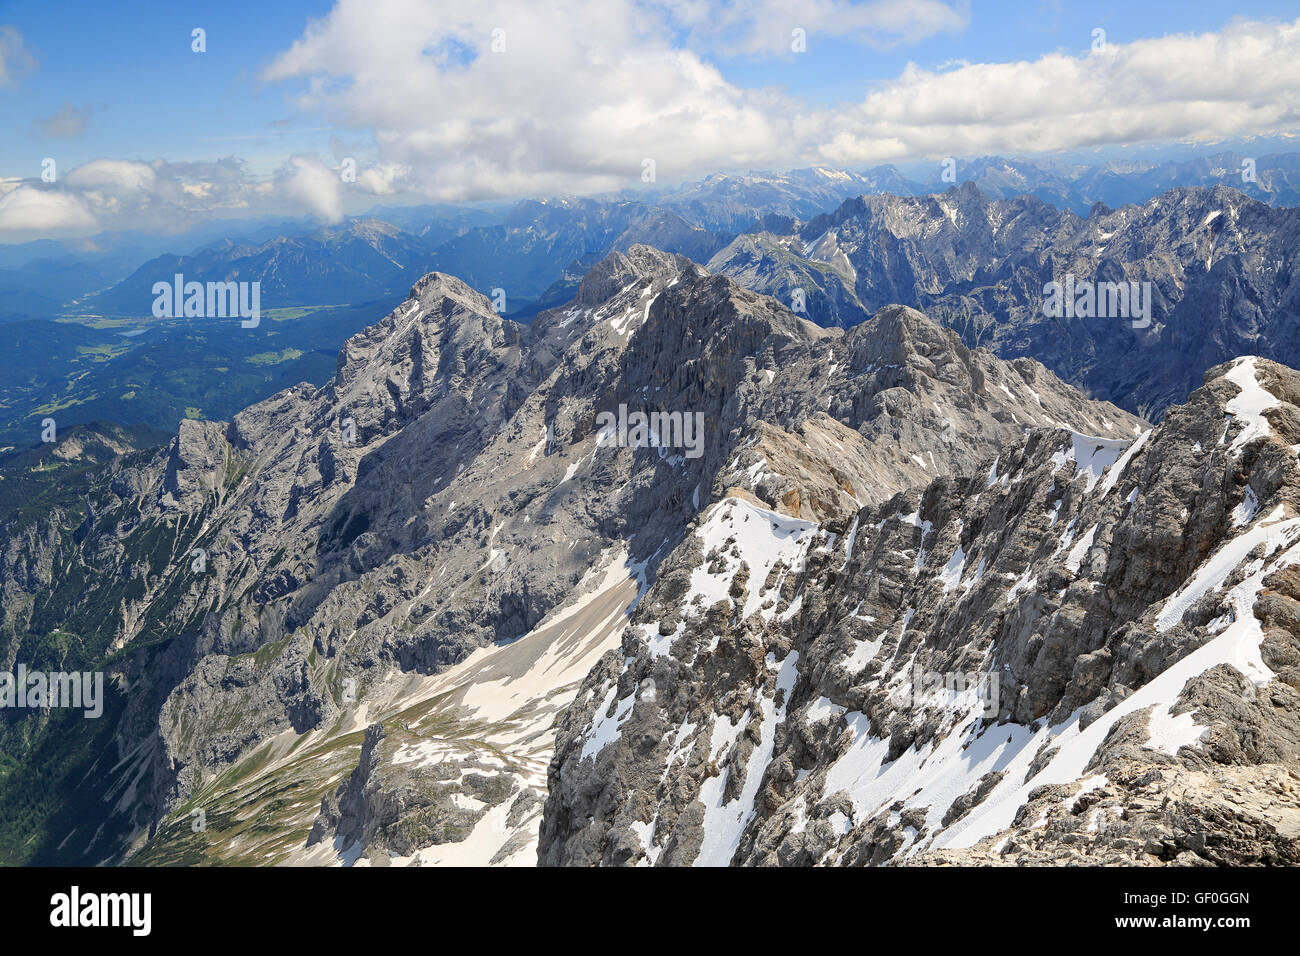 Alps mountains view from the top of Zugspitze, Germany. The Zugspitze, at 2,962 m above sea level. Stock Photo